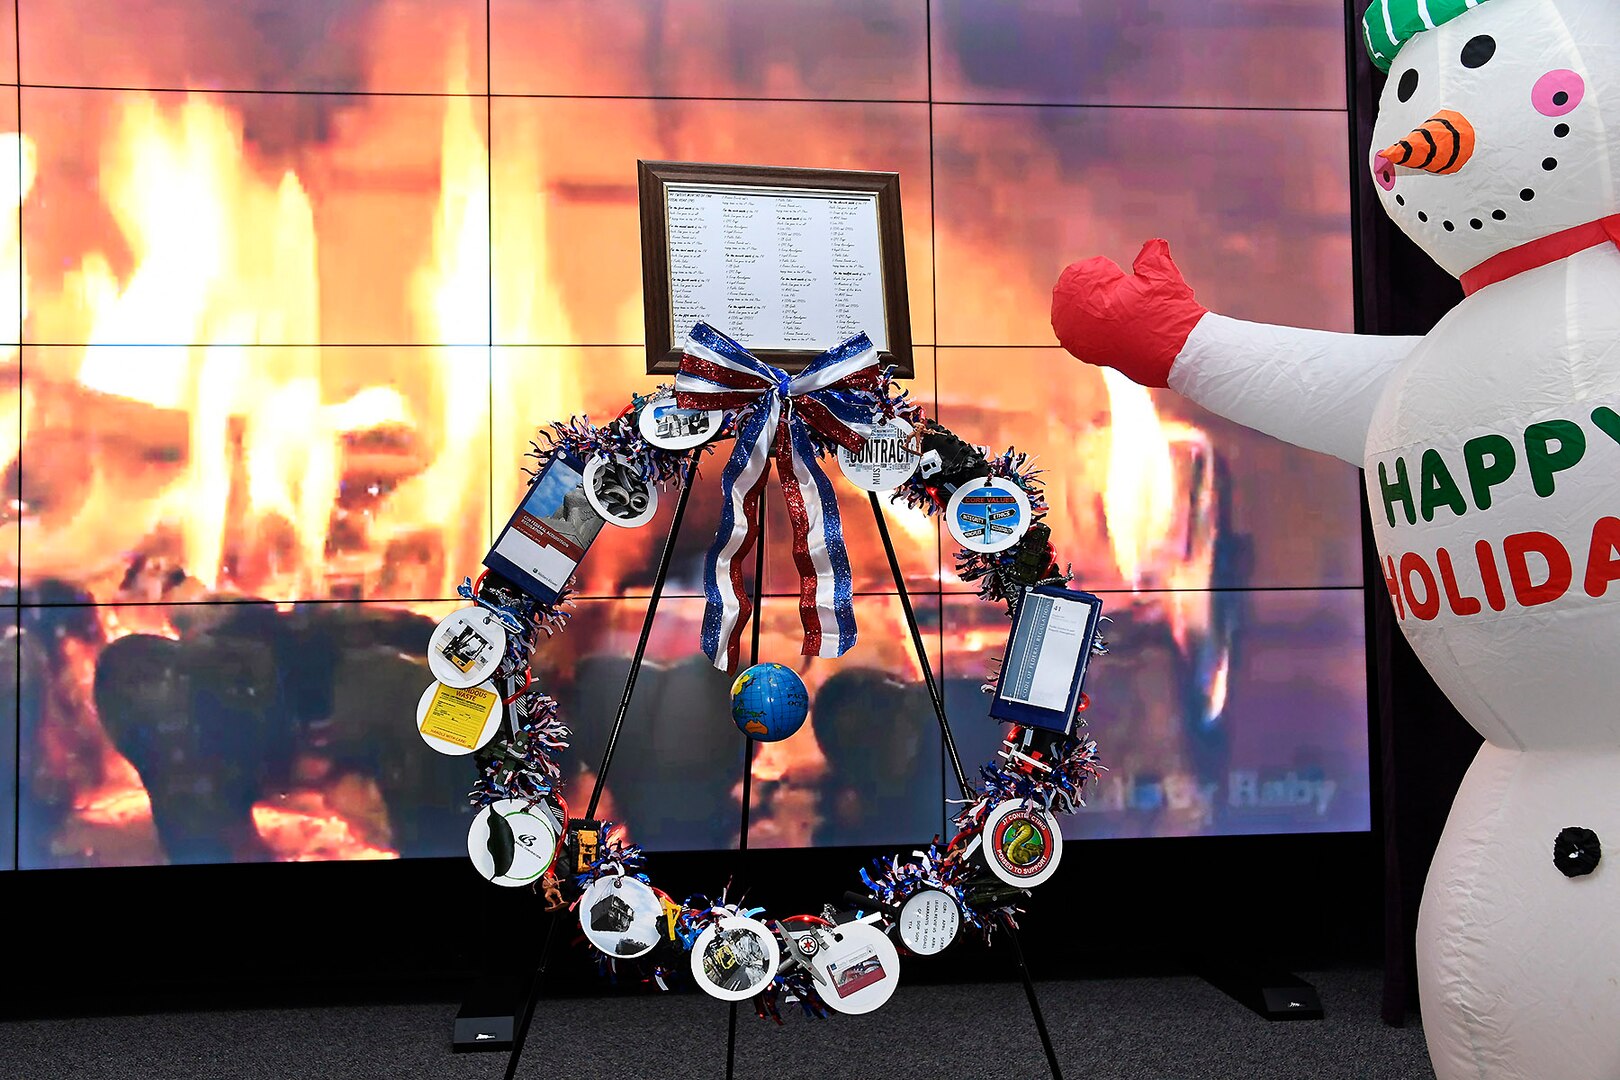 The Contracting Directorate’s entry in the wreath competition features the staff own carol, “The Twelve Months of the Fiscal Year,” as well as clever visuals about contracting.